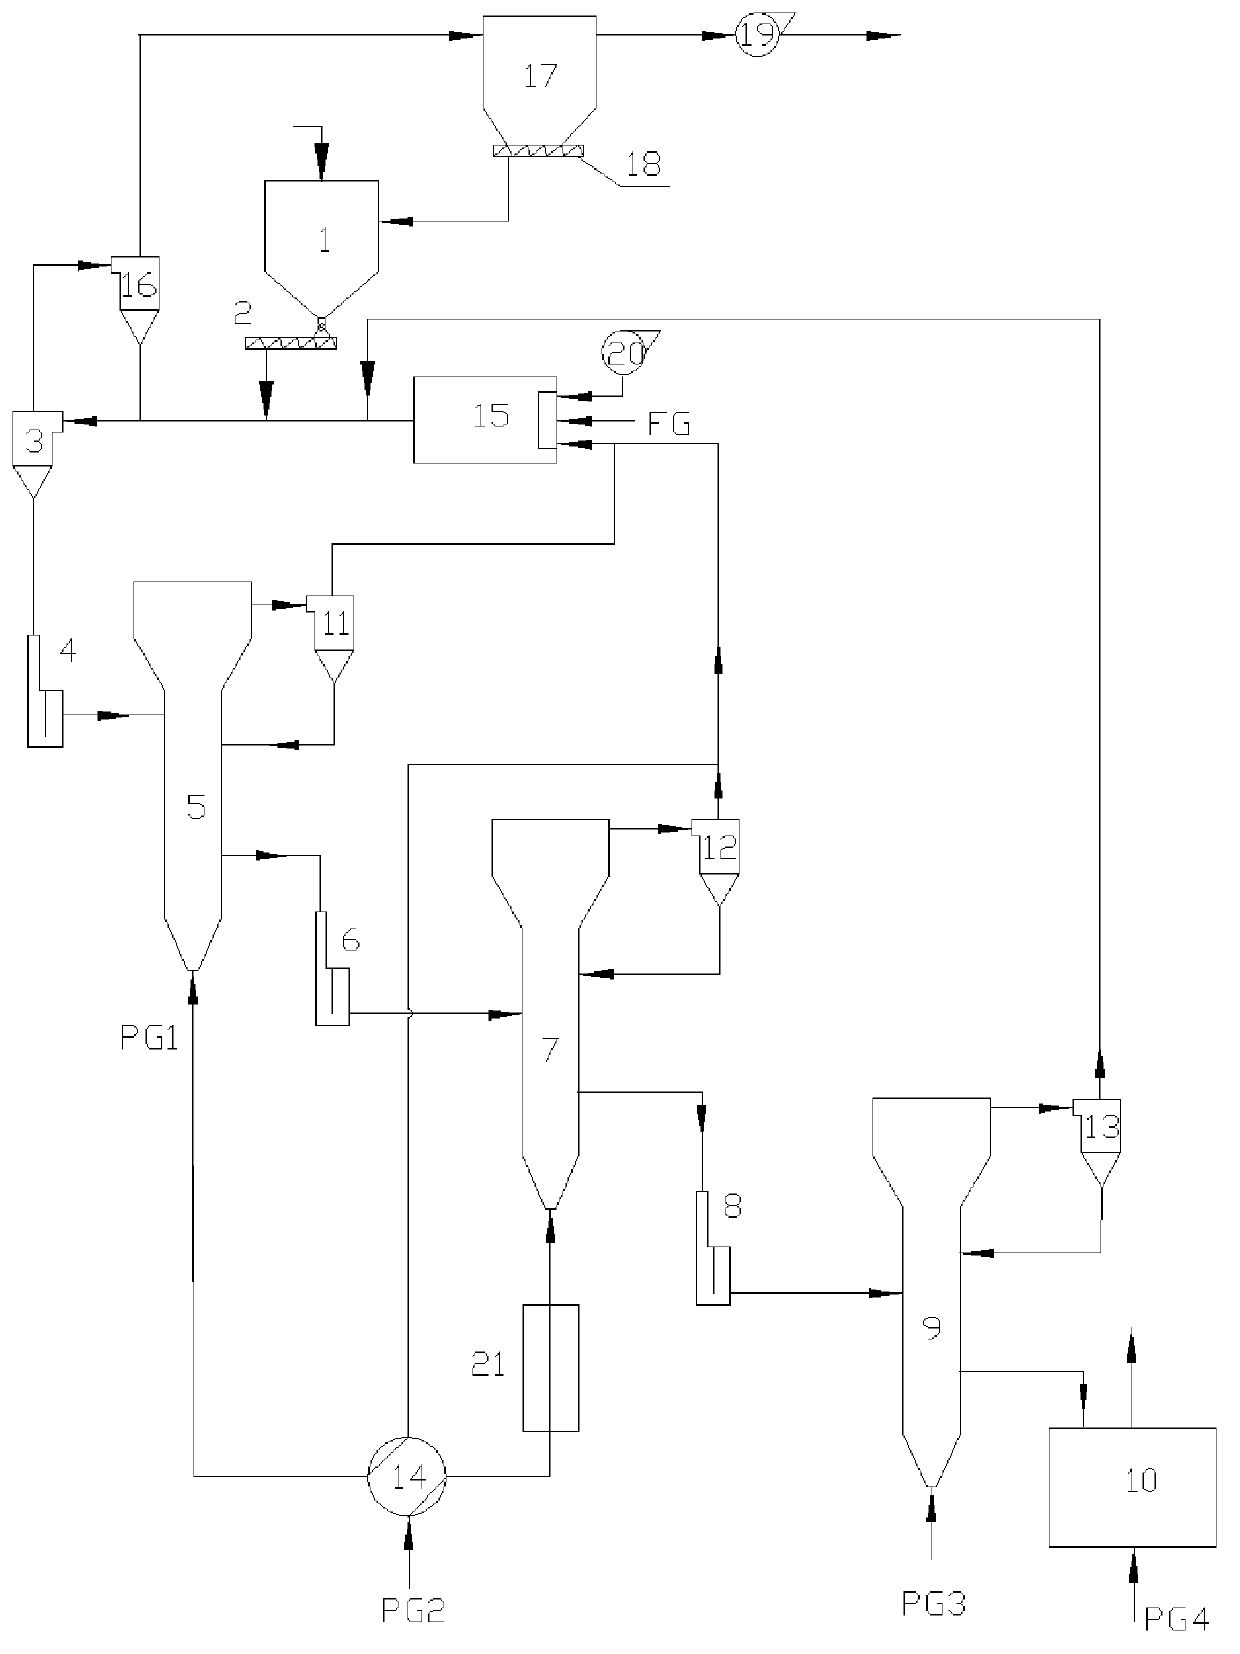 Process and device for preparing superfine nickel powder